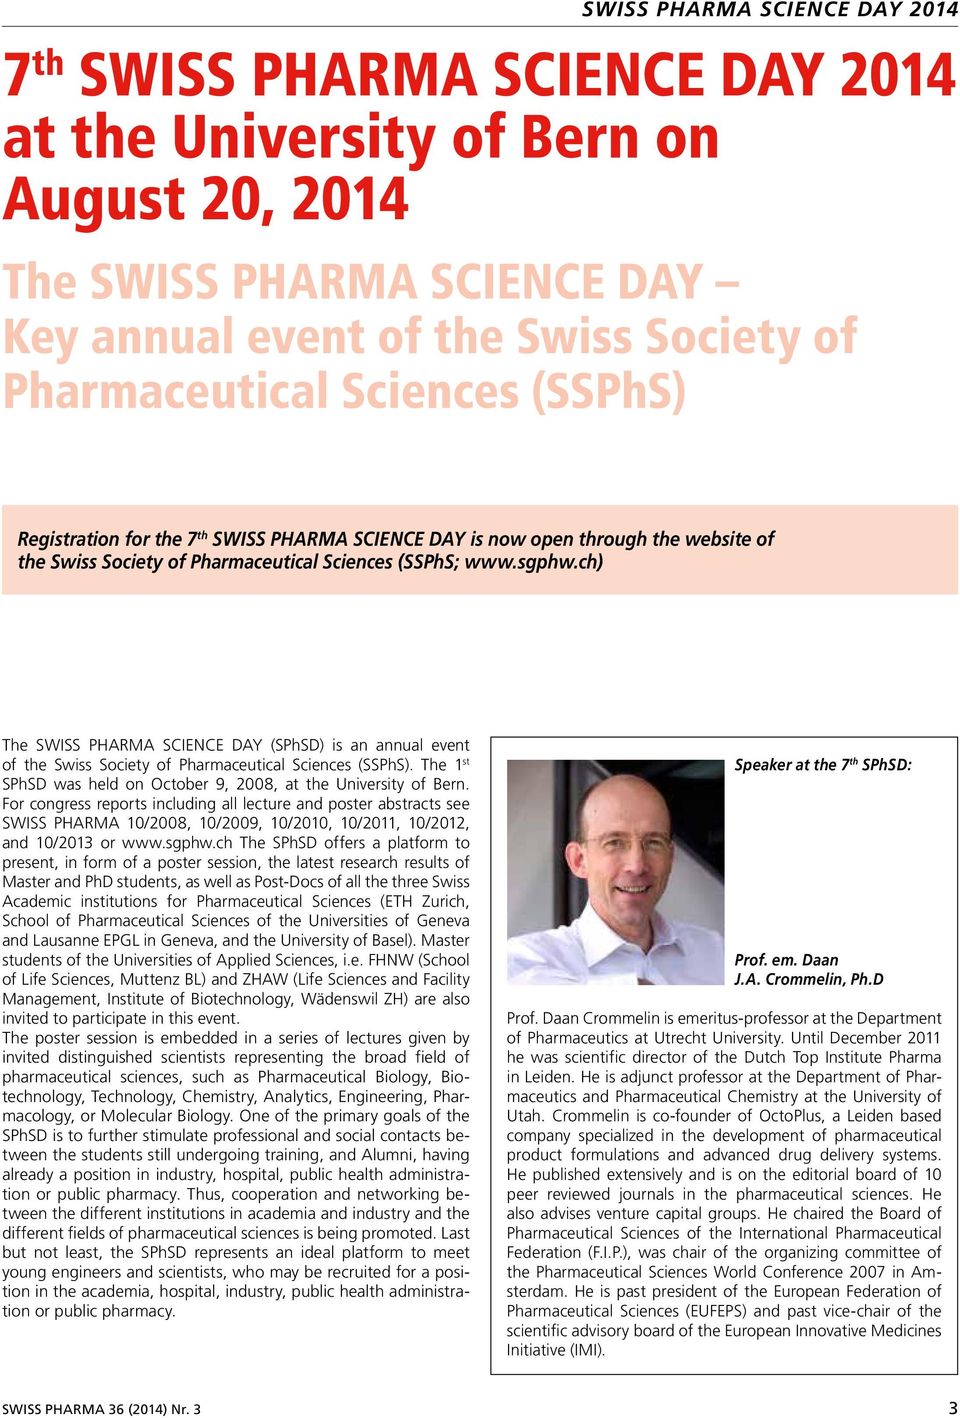 ch) The SWISS PHARMA SCIENCE DAY (SPhSD) is an annual event of the Swiss Society of Pharmaceutical Sciences (SSPhS). The 1 st SPhSD was held on October 9, 2008, at the University of Bern.